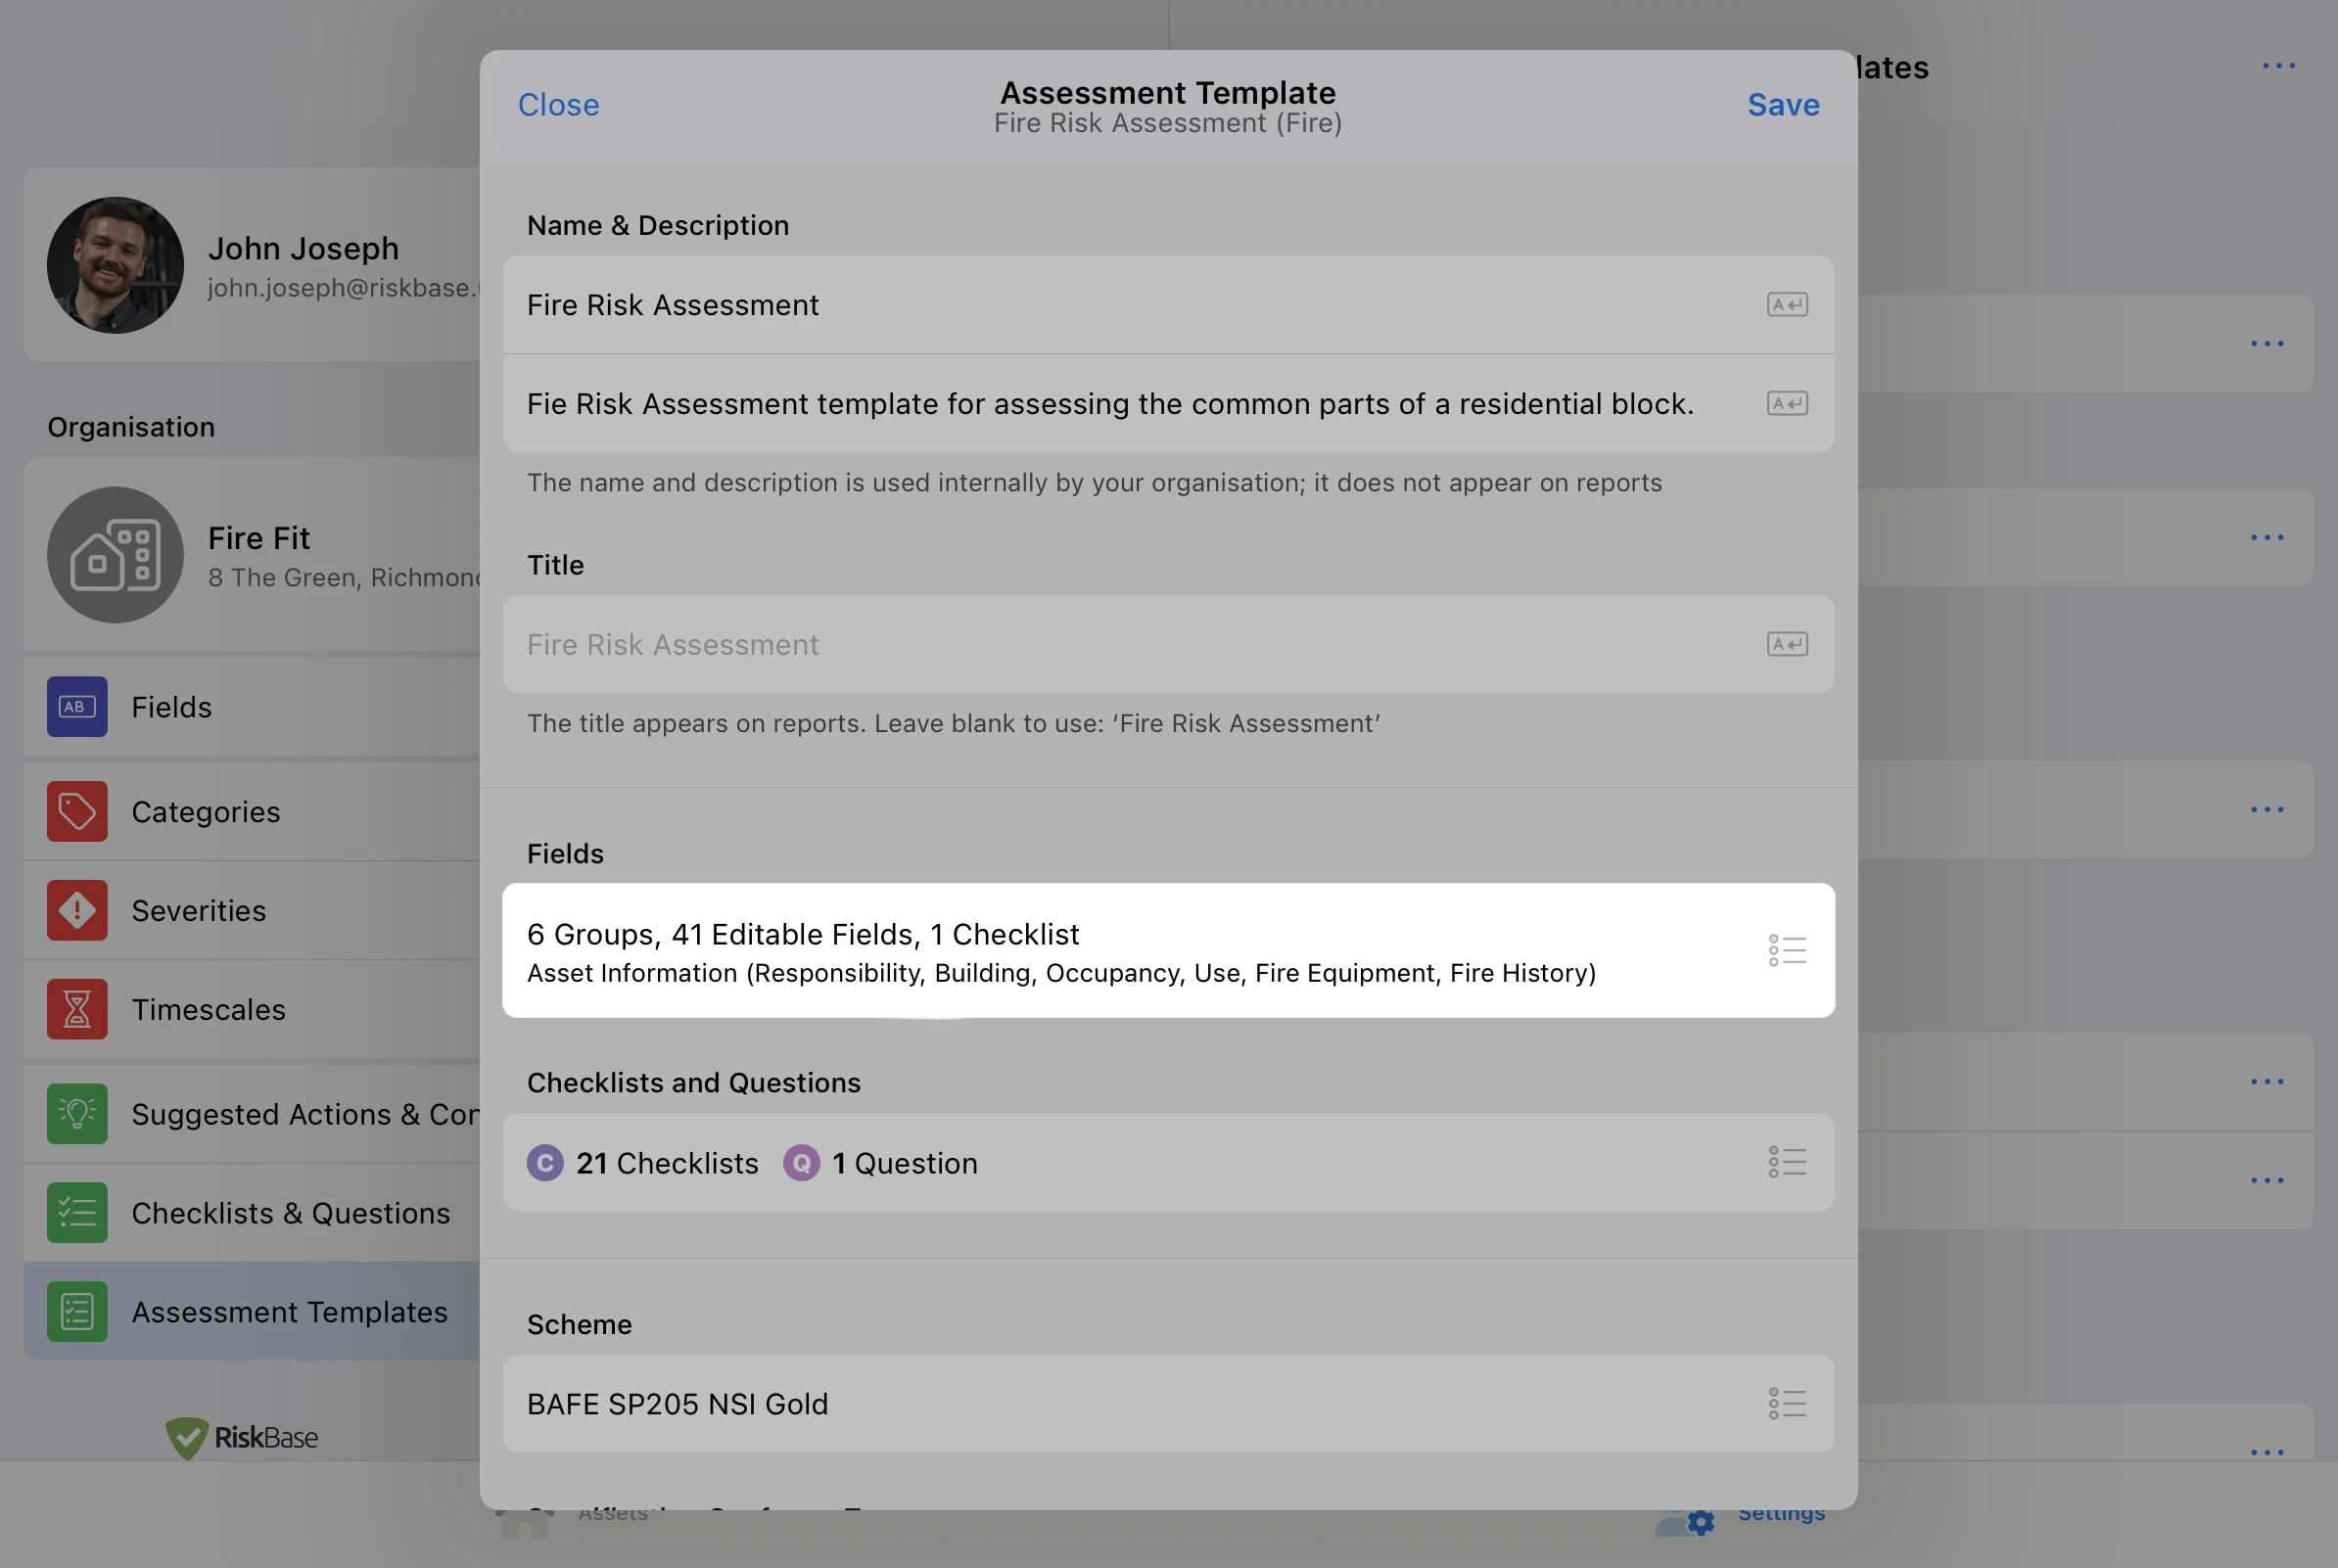 Add Field to Assessment Templates